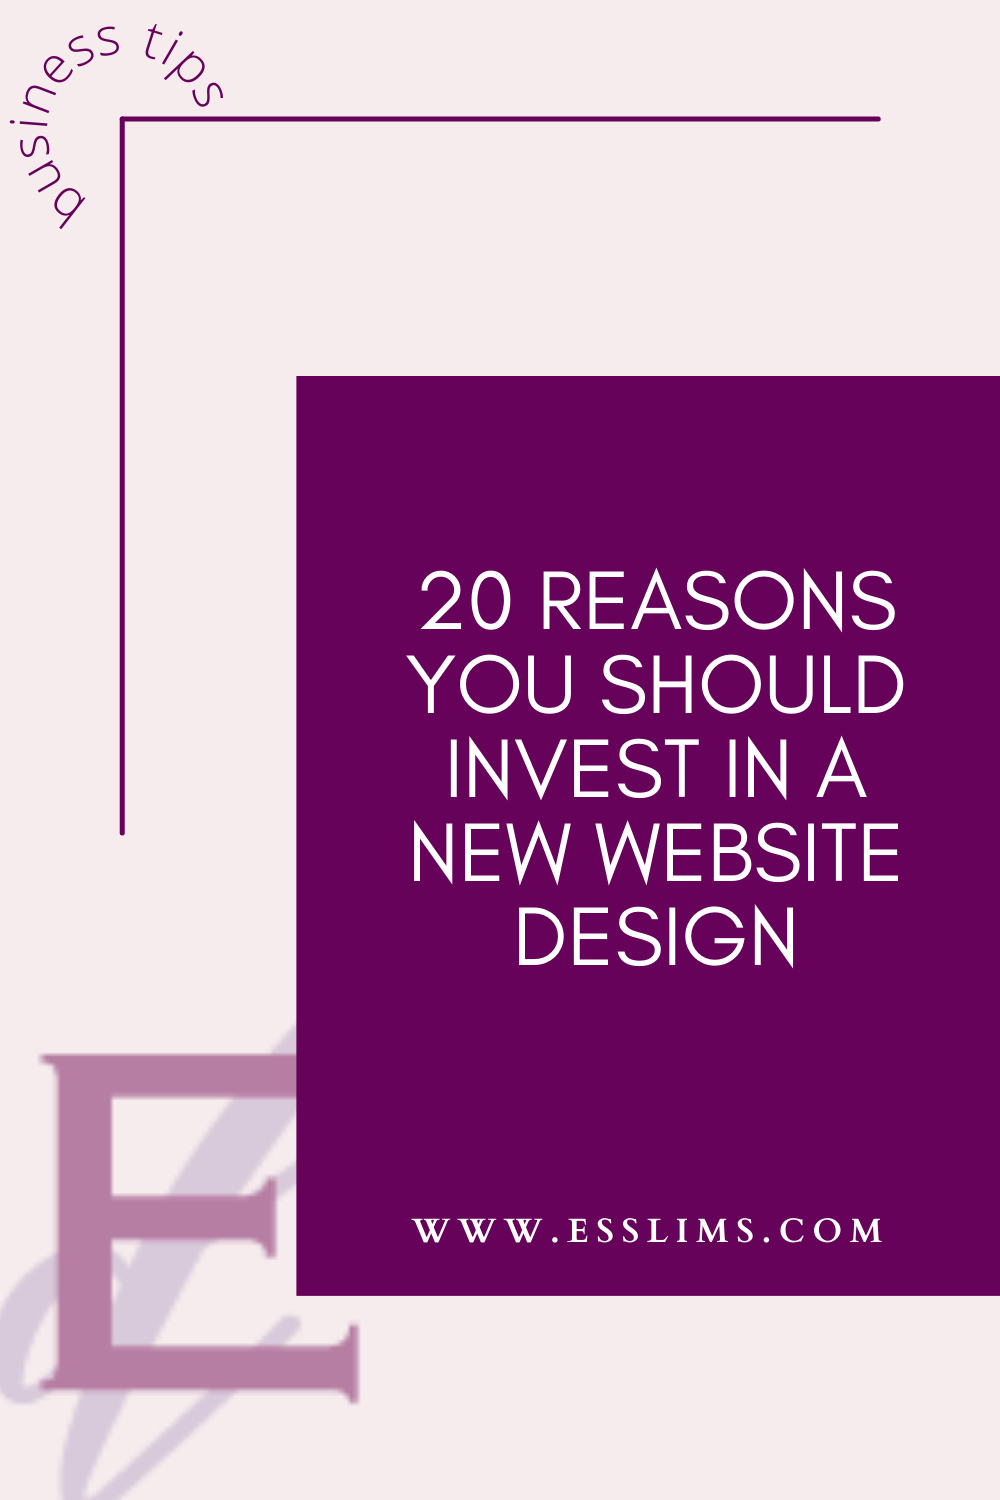 20 Reasons You Should Invest In A New Website Design